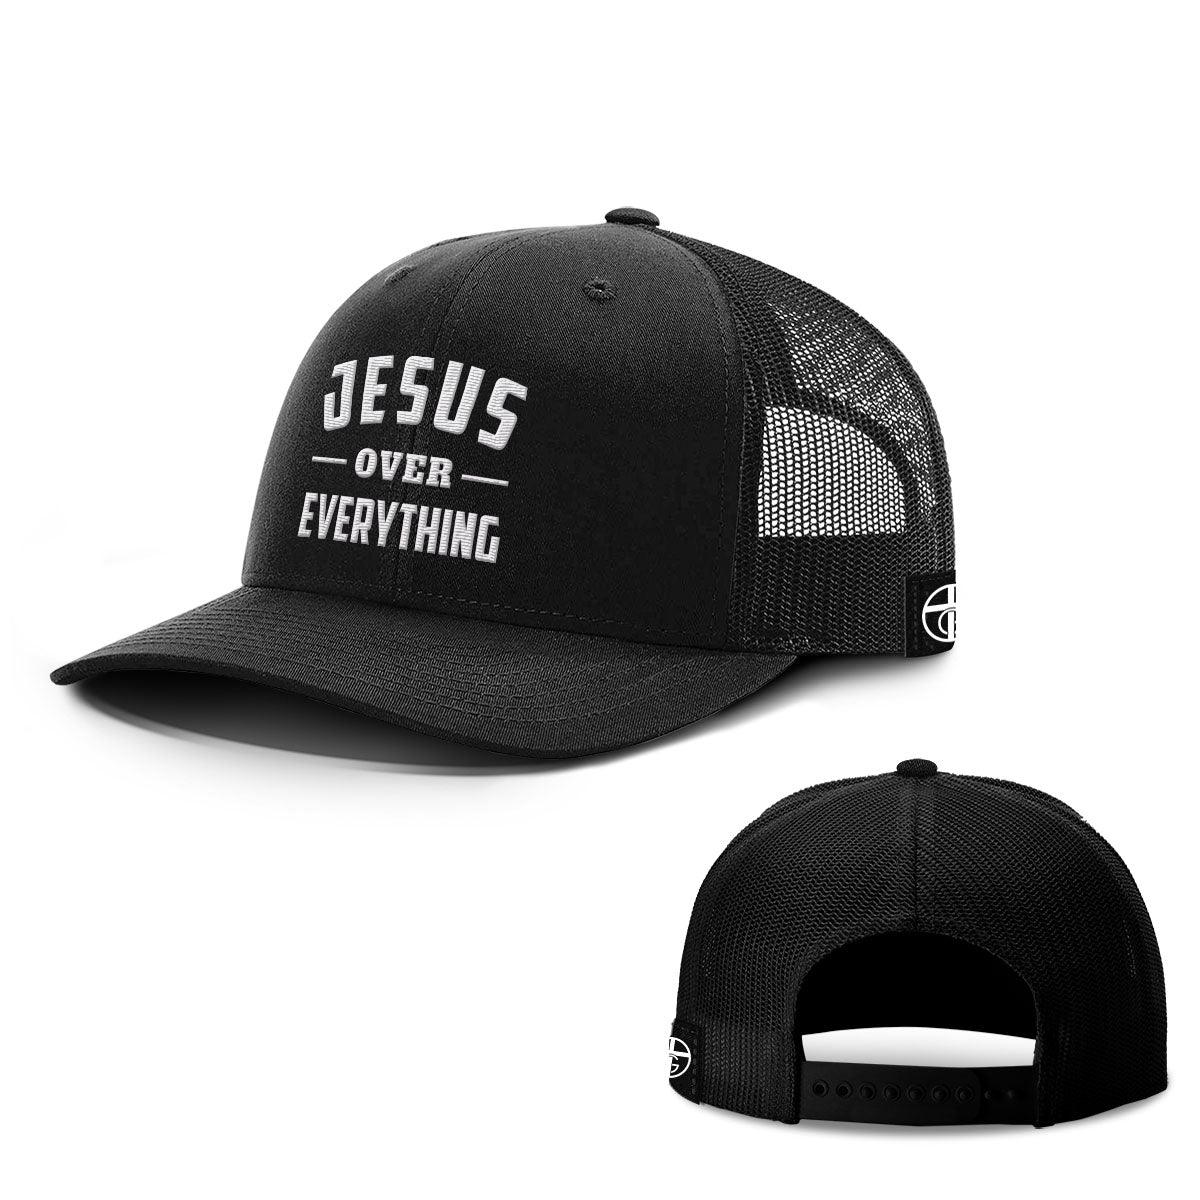 Jesus Over Everything Hats - Our True God